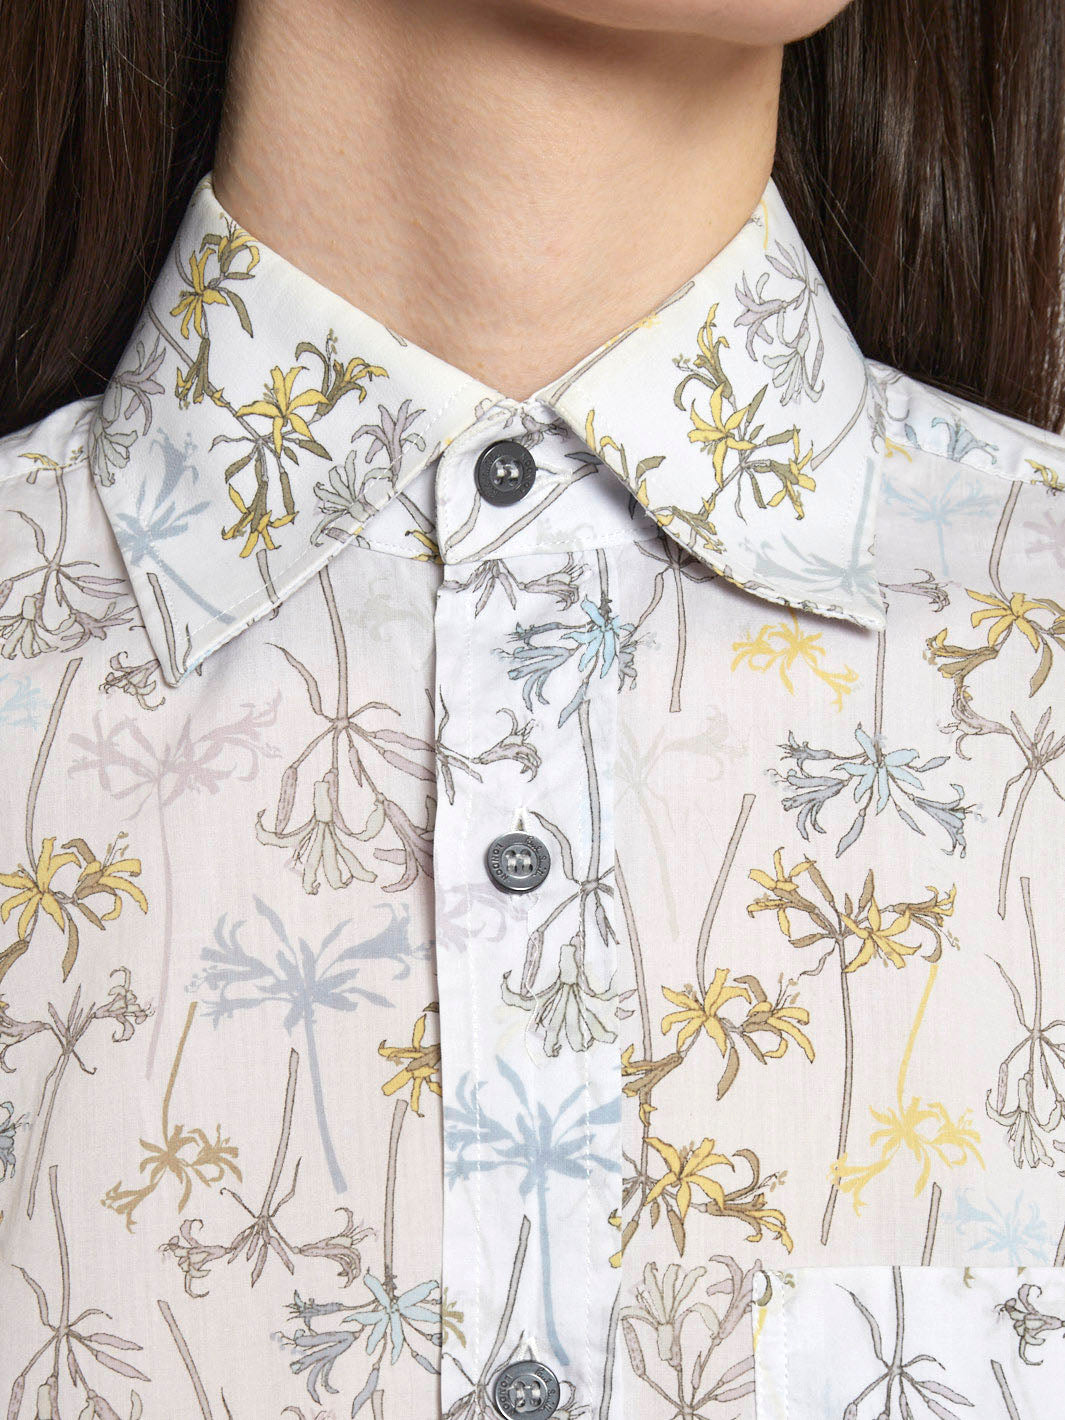 Y2K Paul Smith cotton blouse with colorful lilies pattern